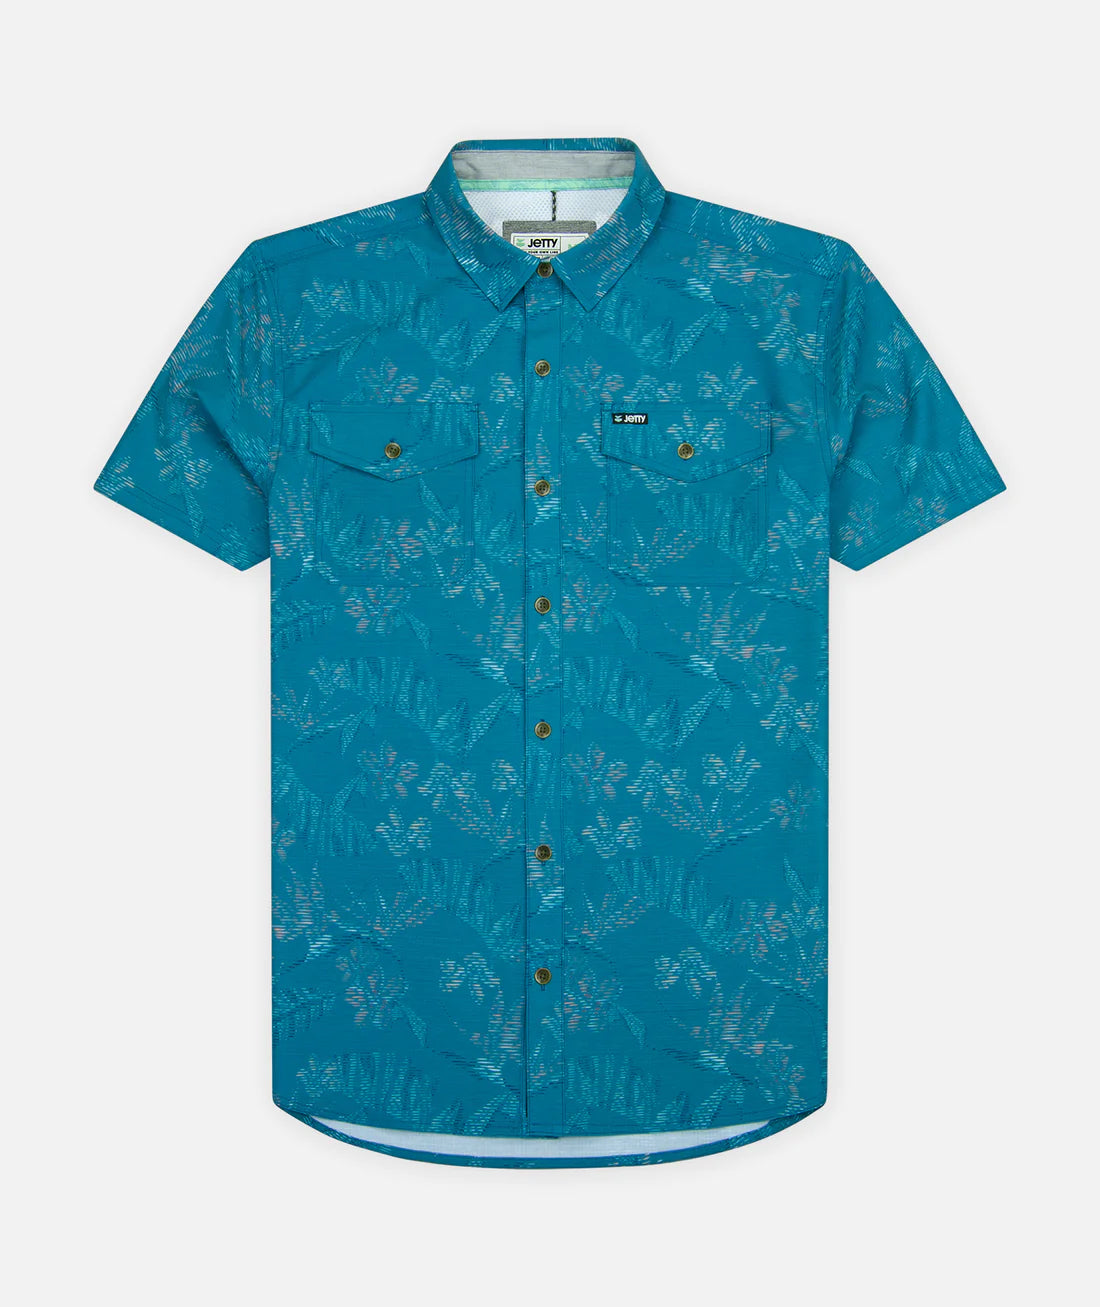 Jetty's Wellspoint Oystex Shirt in the color/print Pacific